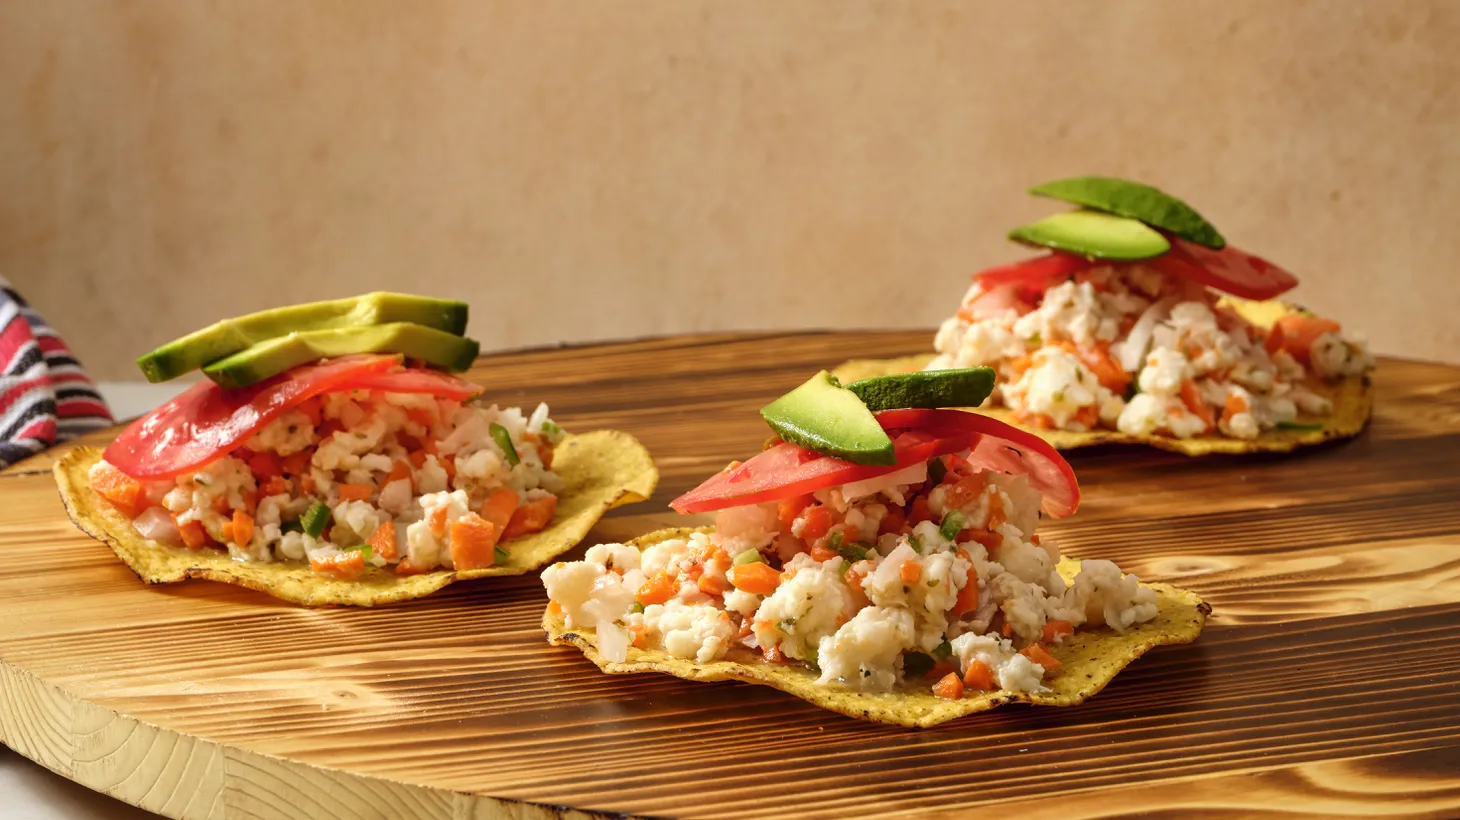 Pati Jinich’s recipe for Ceviche Tostadas Puerto Vallarta is a good starting point for making the cooling dish this summer.